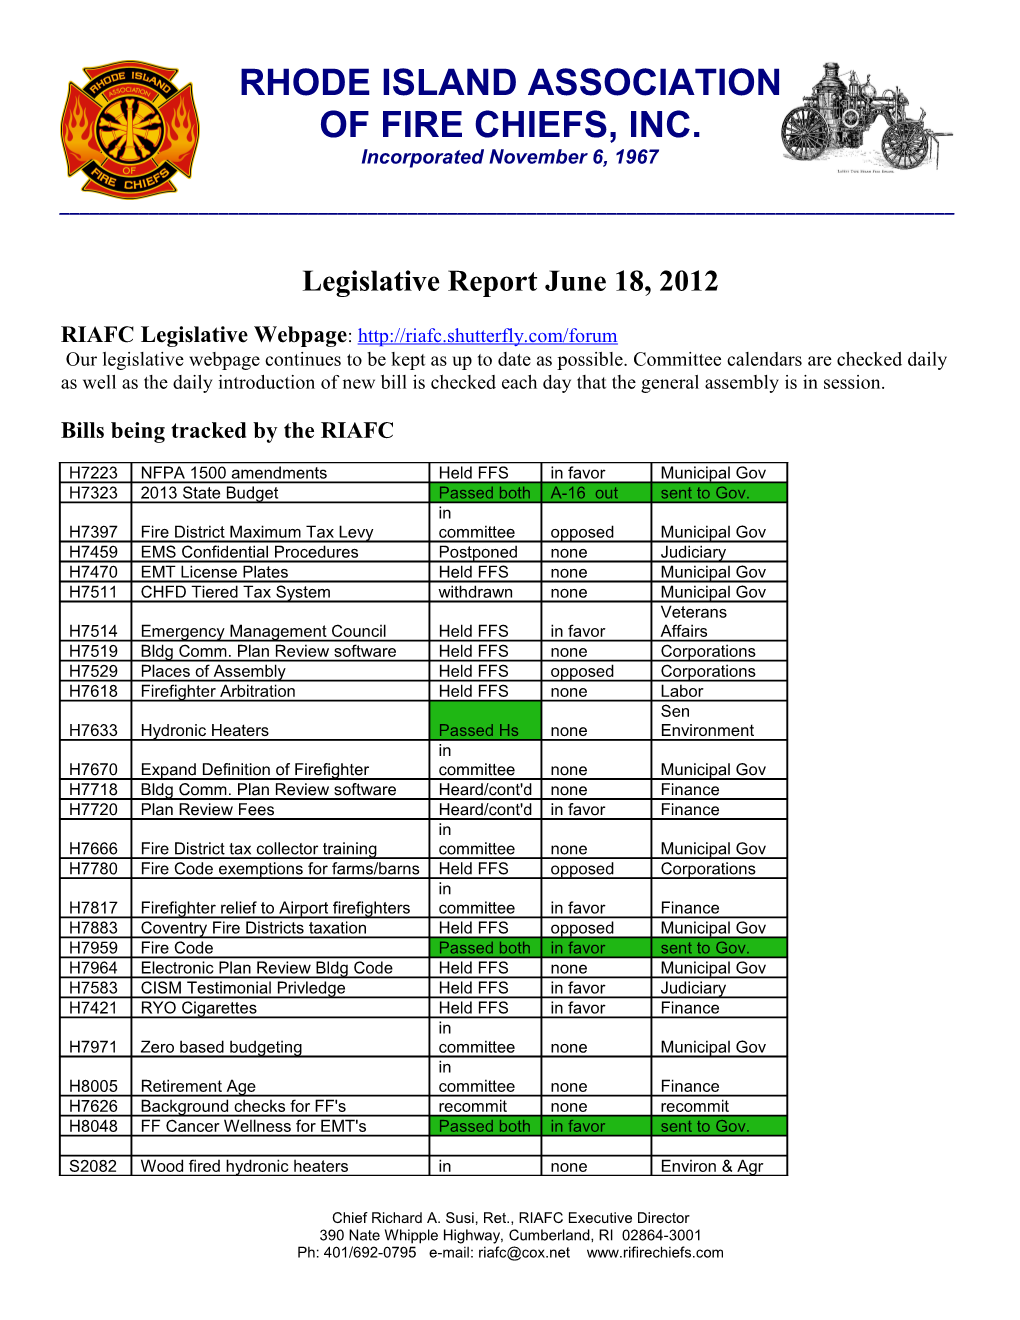 Legislative Report for the Month of January 2010